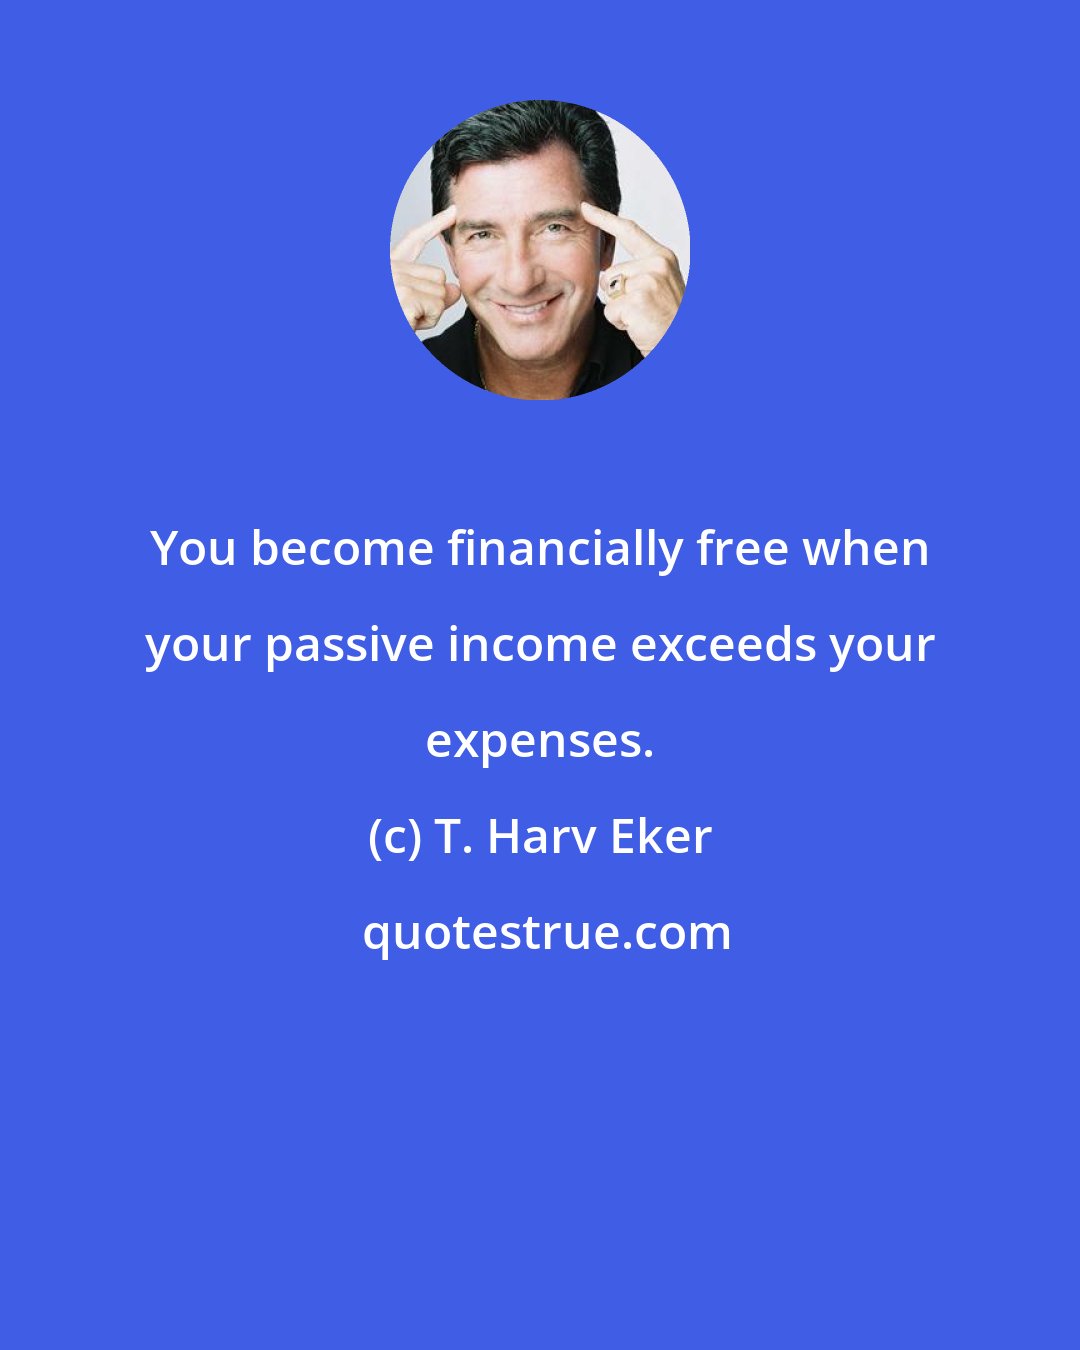 T. Harv Eker: You become financially free when your passive income exceeds your expenses.